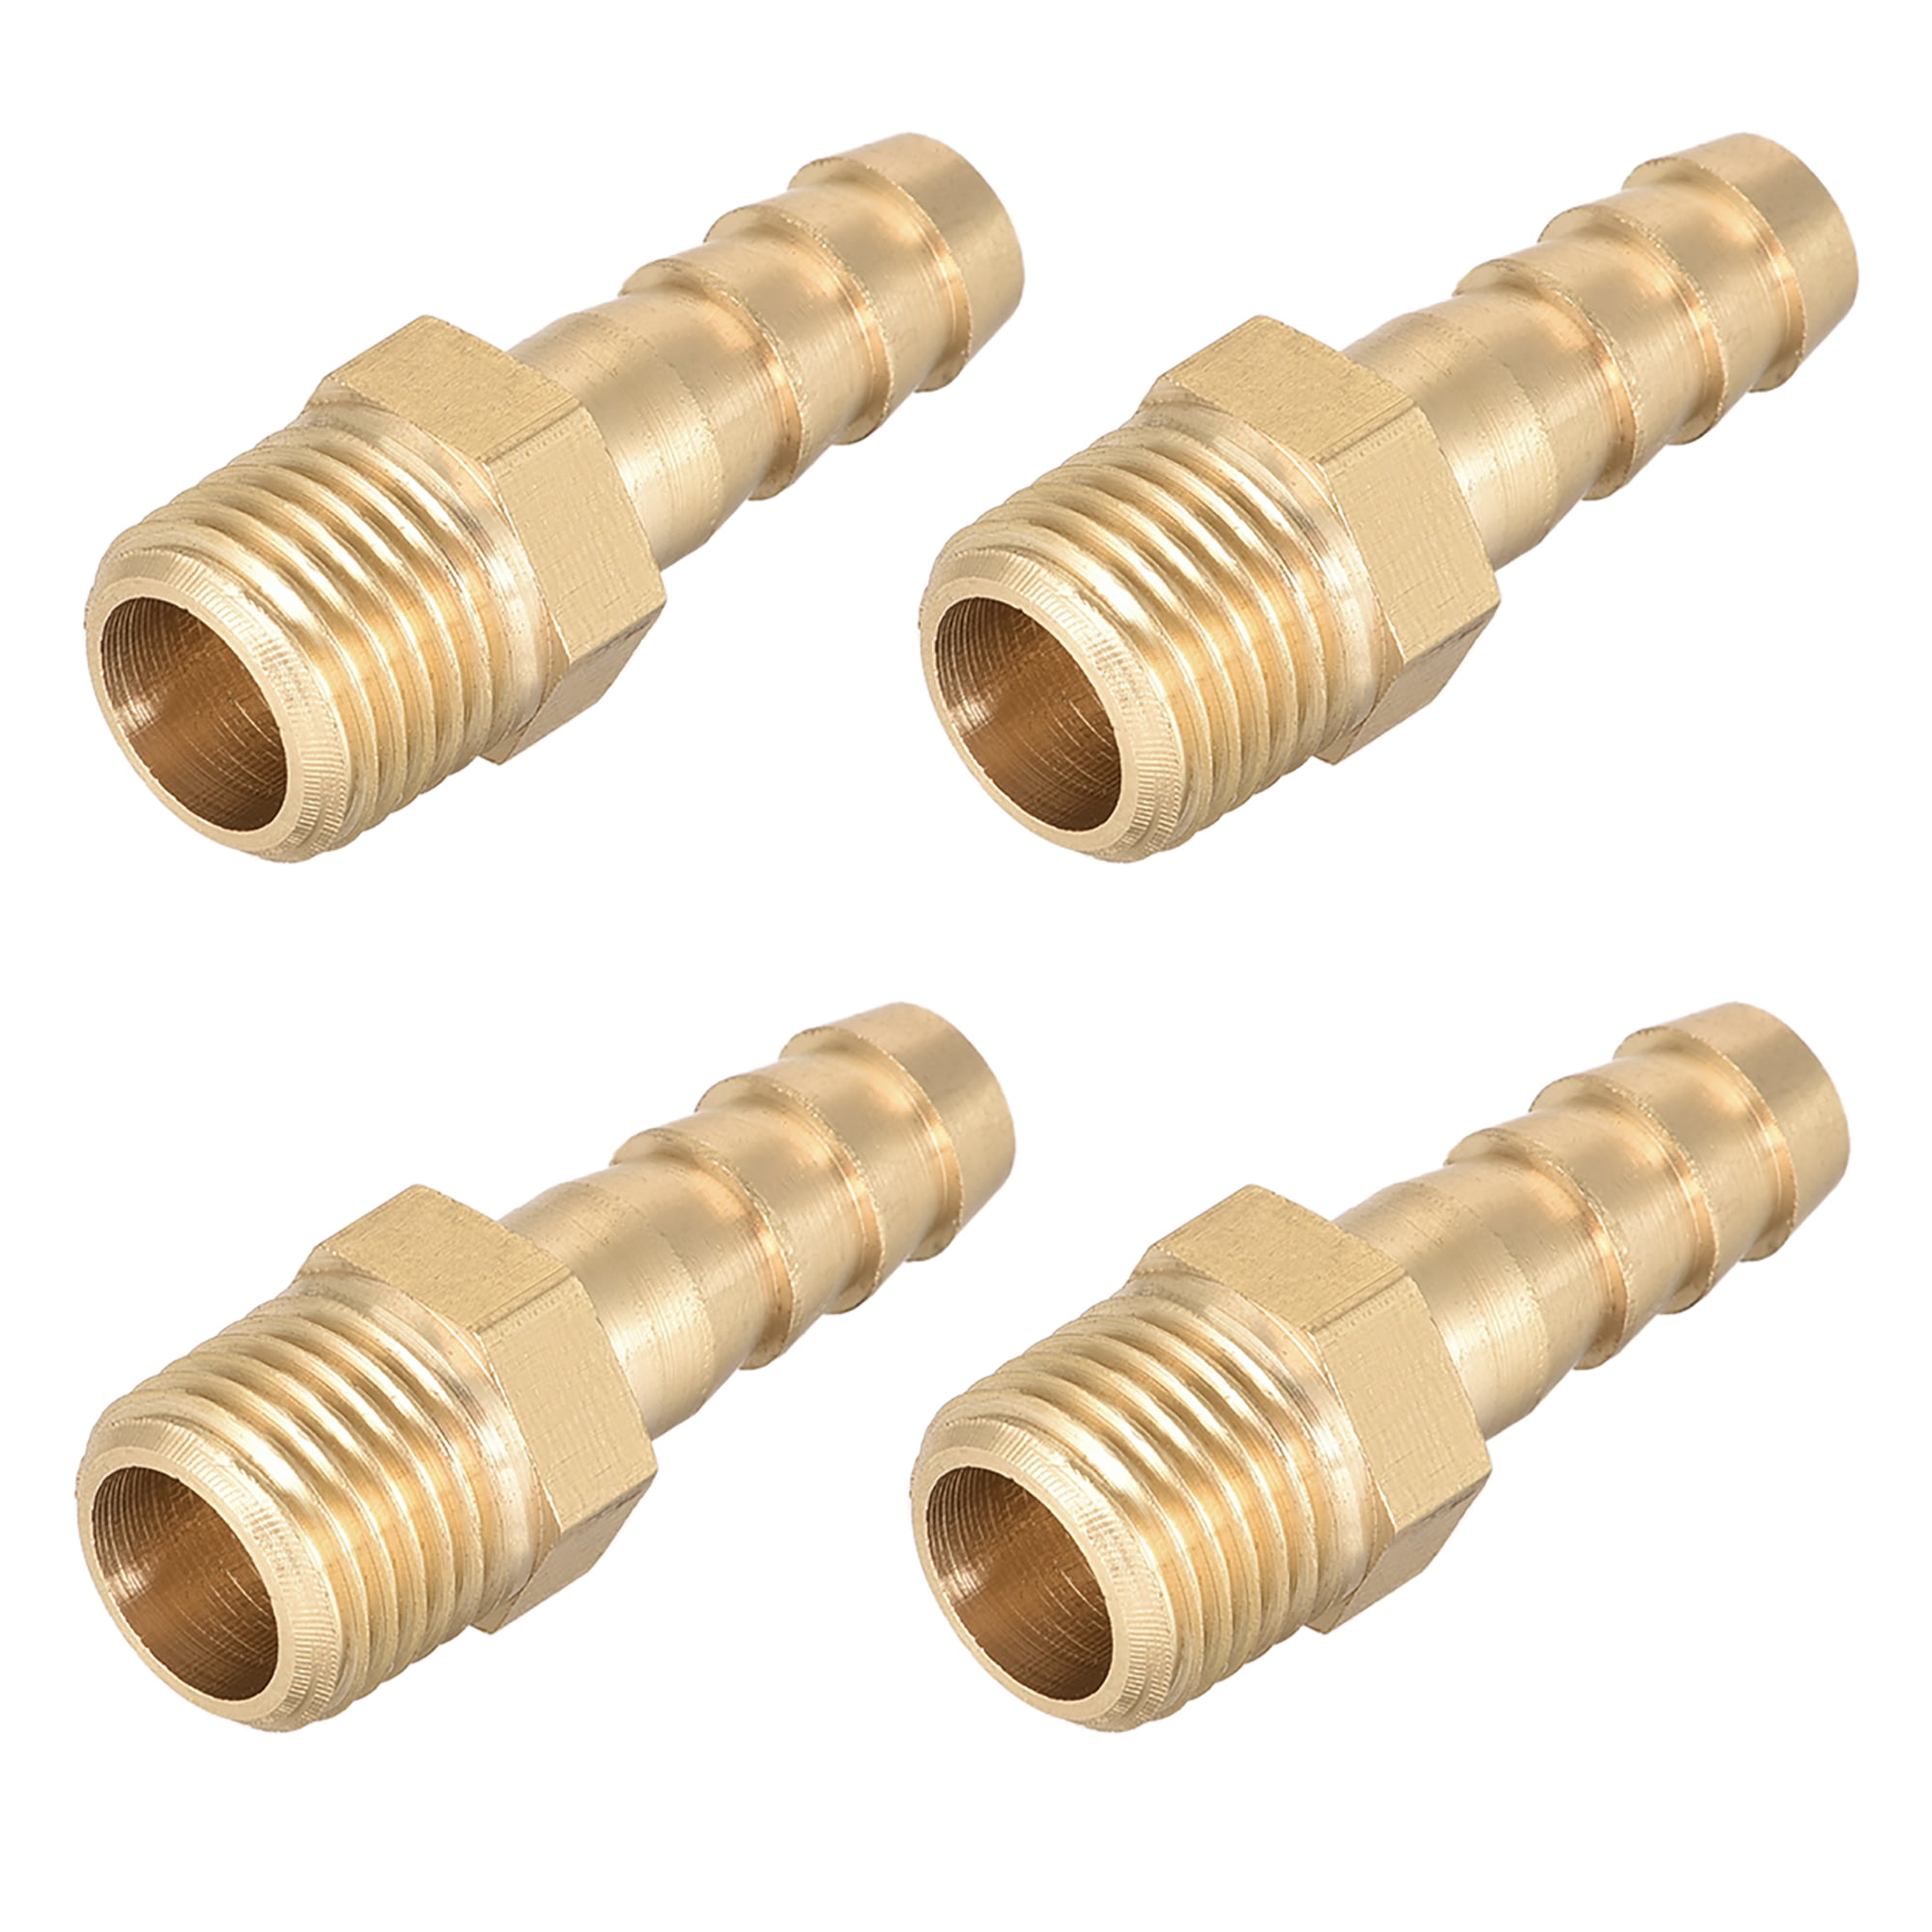 Brass Fitting Connector Metric M6x1 Male to Barb Hose ID 8mm 2pcs 